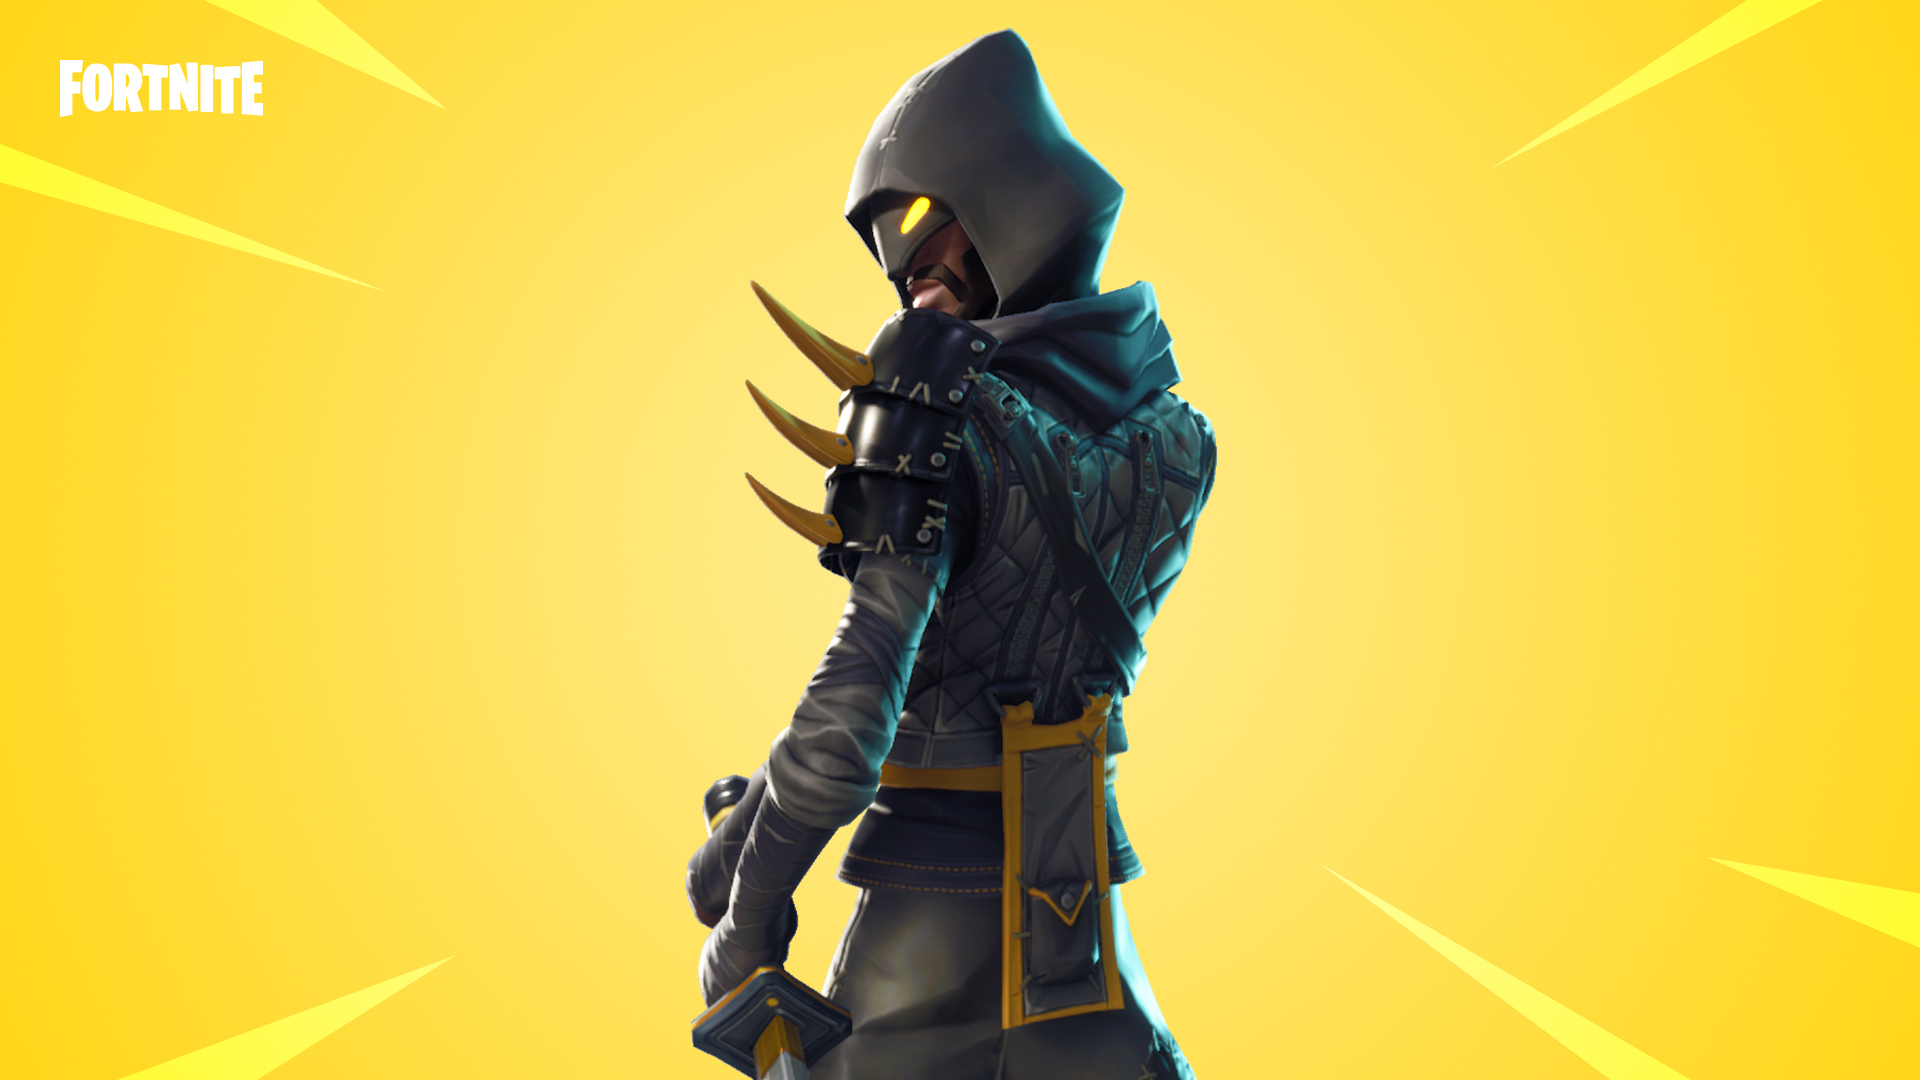 image via epic games - fortnite cloaked shadow png